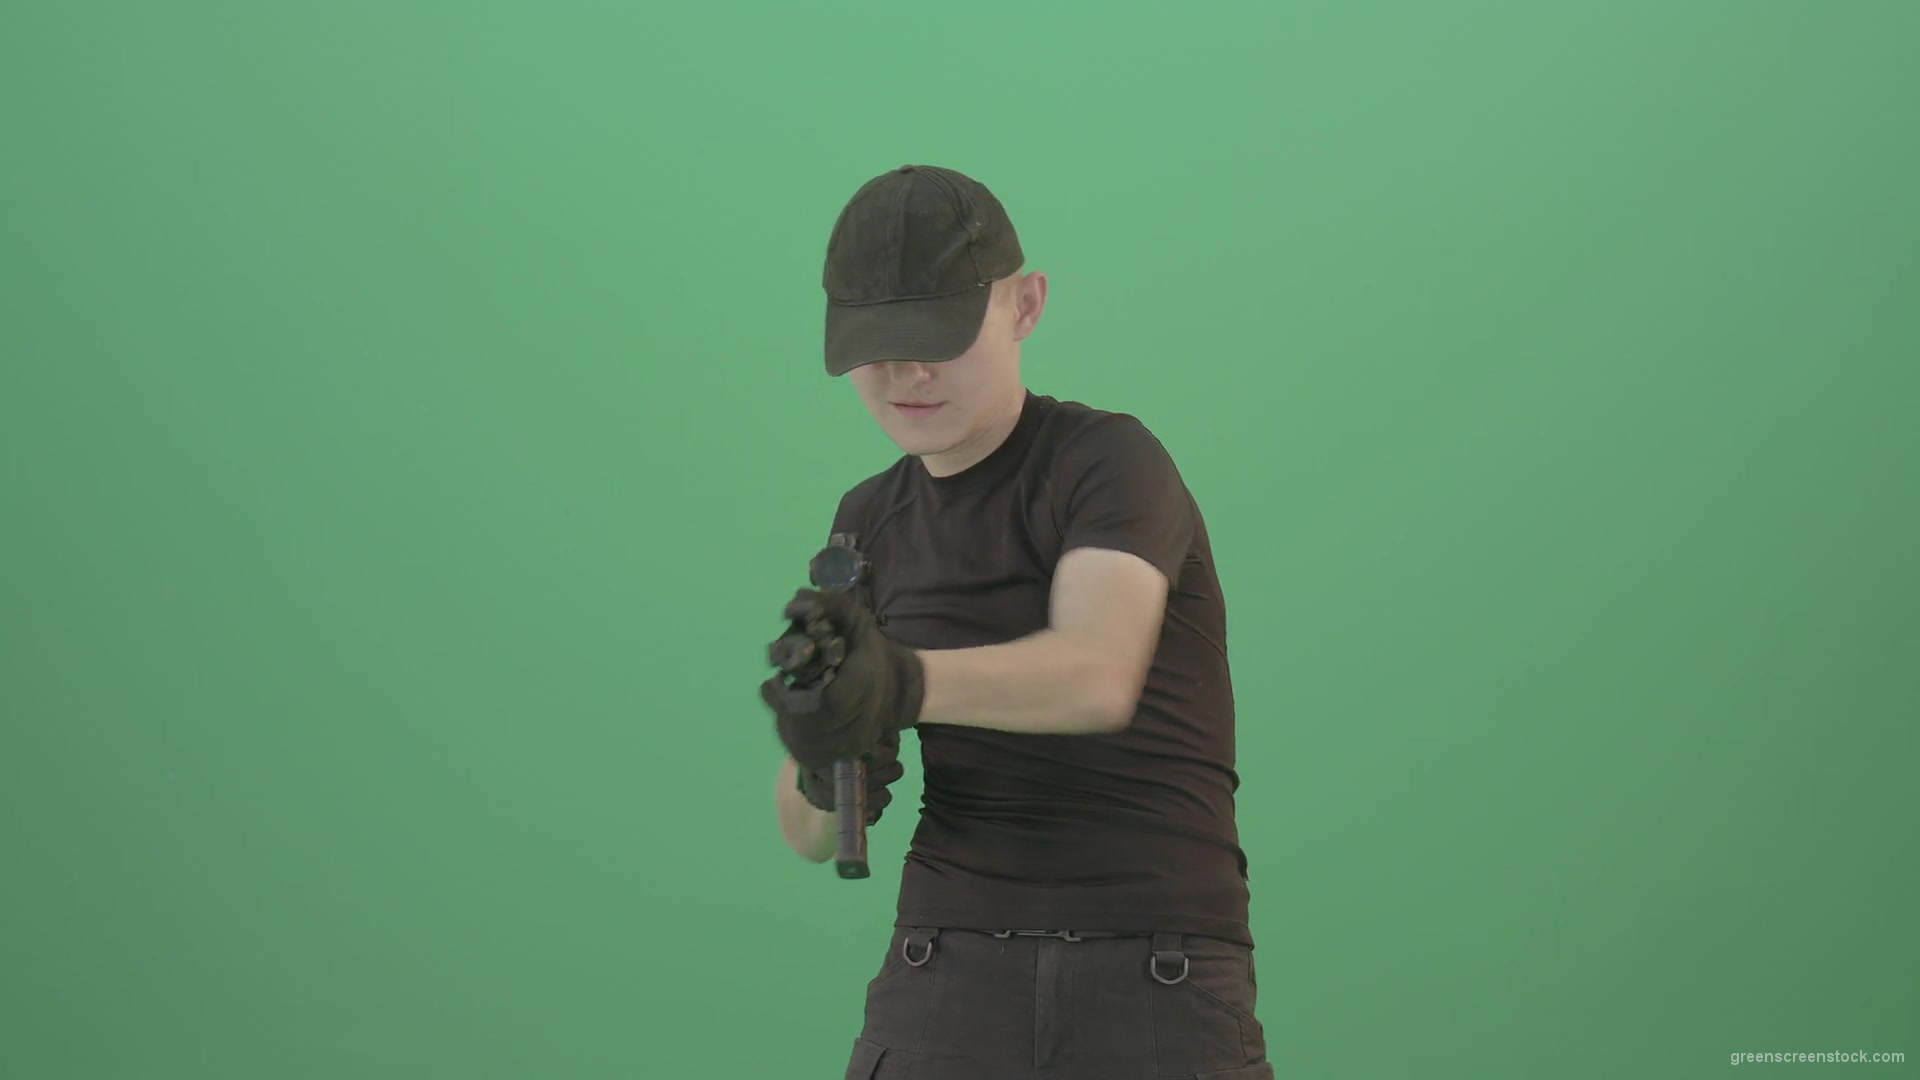 Funny-Small-boy-terrorist-shooting-enemies-from-machine-gun-isolated-on-green-screen-4K-Video-Footage-1920_008 Green Screen Stock